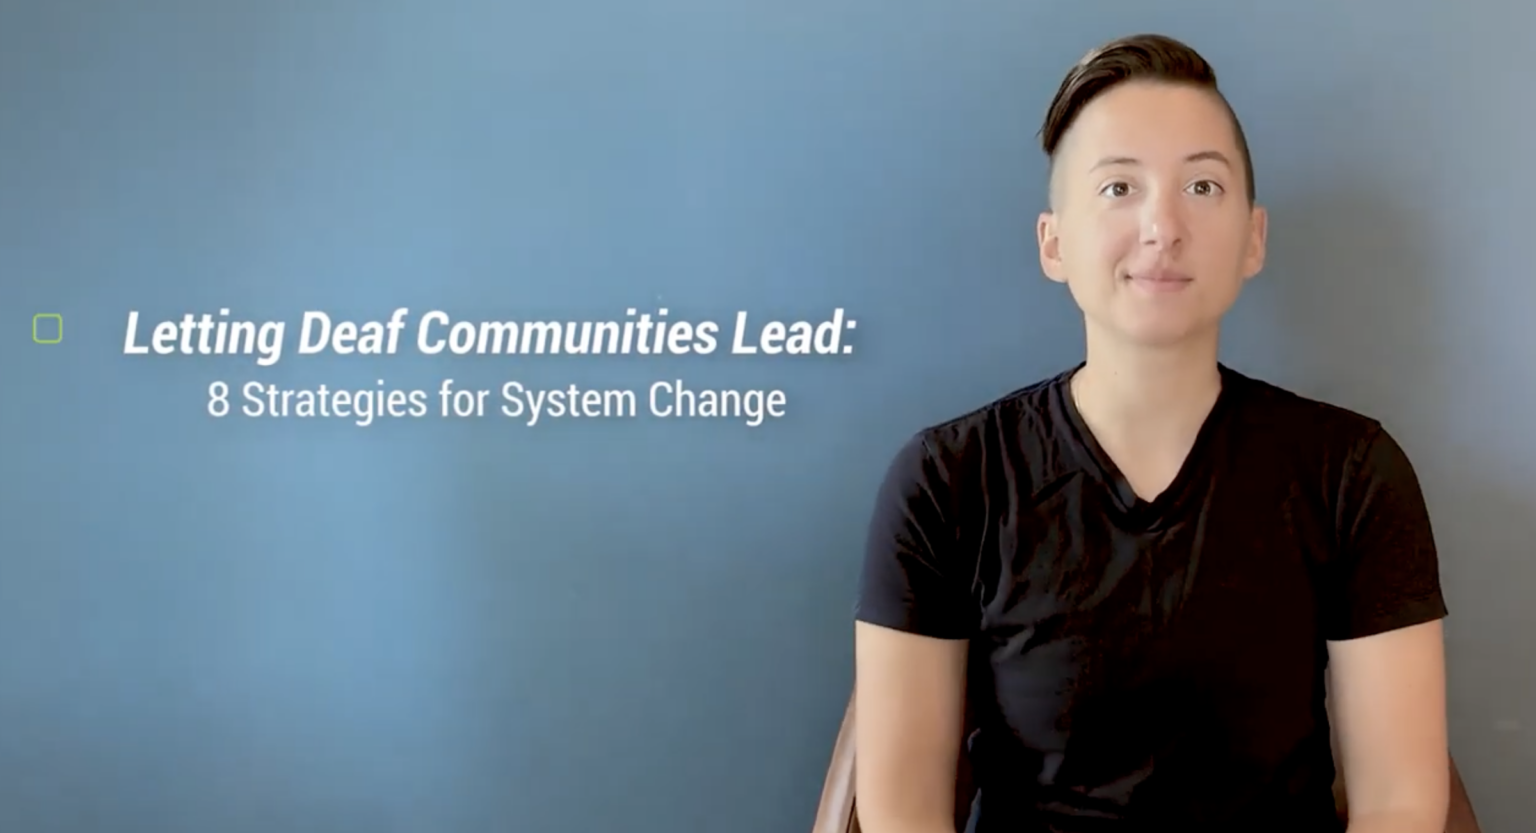 This image has a person sitting on a chair. The background is a blue color. There are some sentences on the screen which read " Letting Deaf Communities Lead: 8 Strategies for System Change"